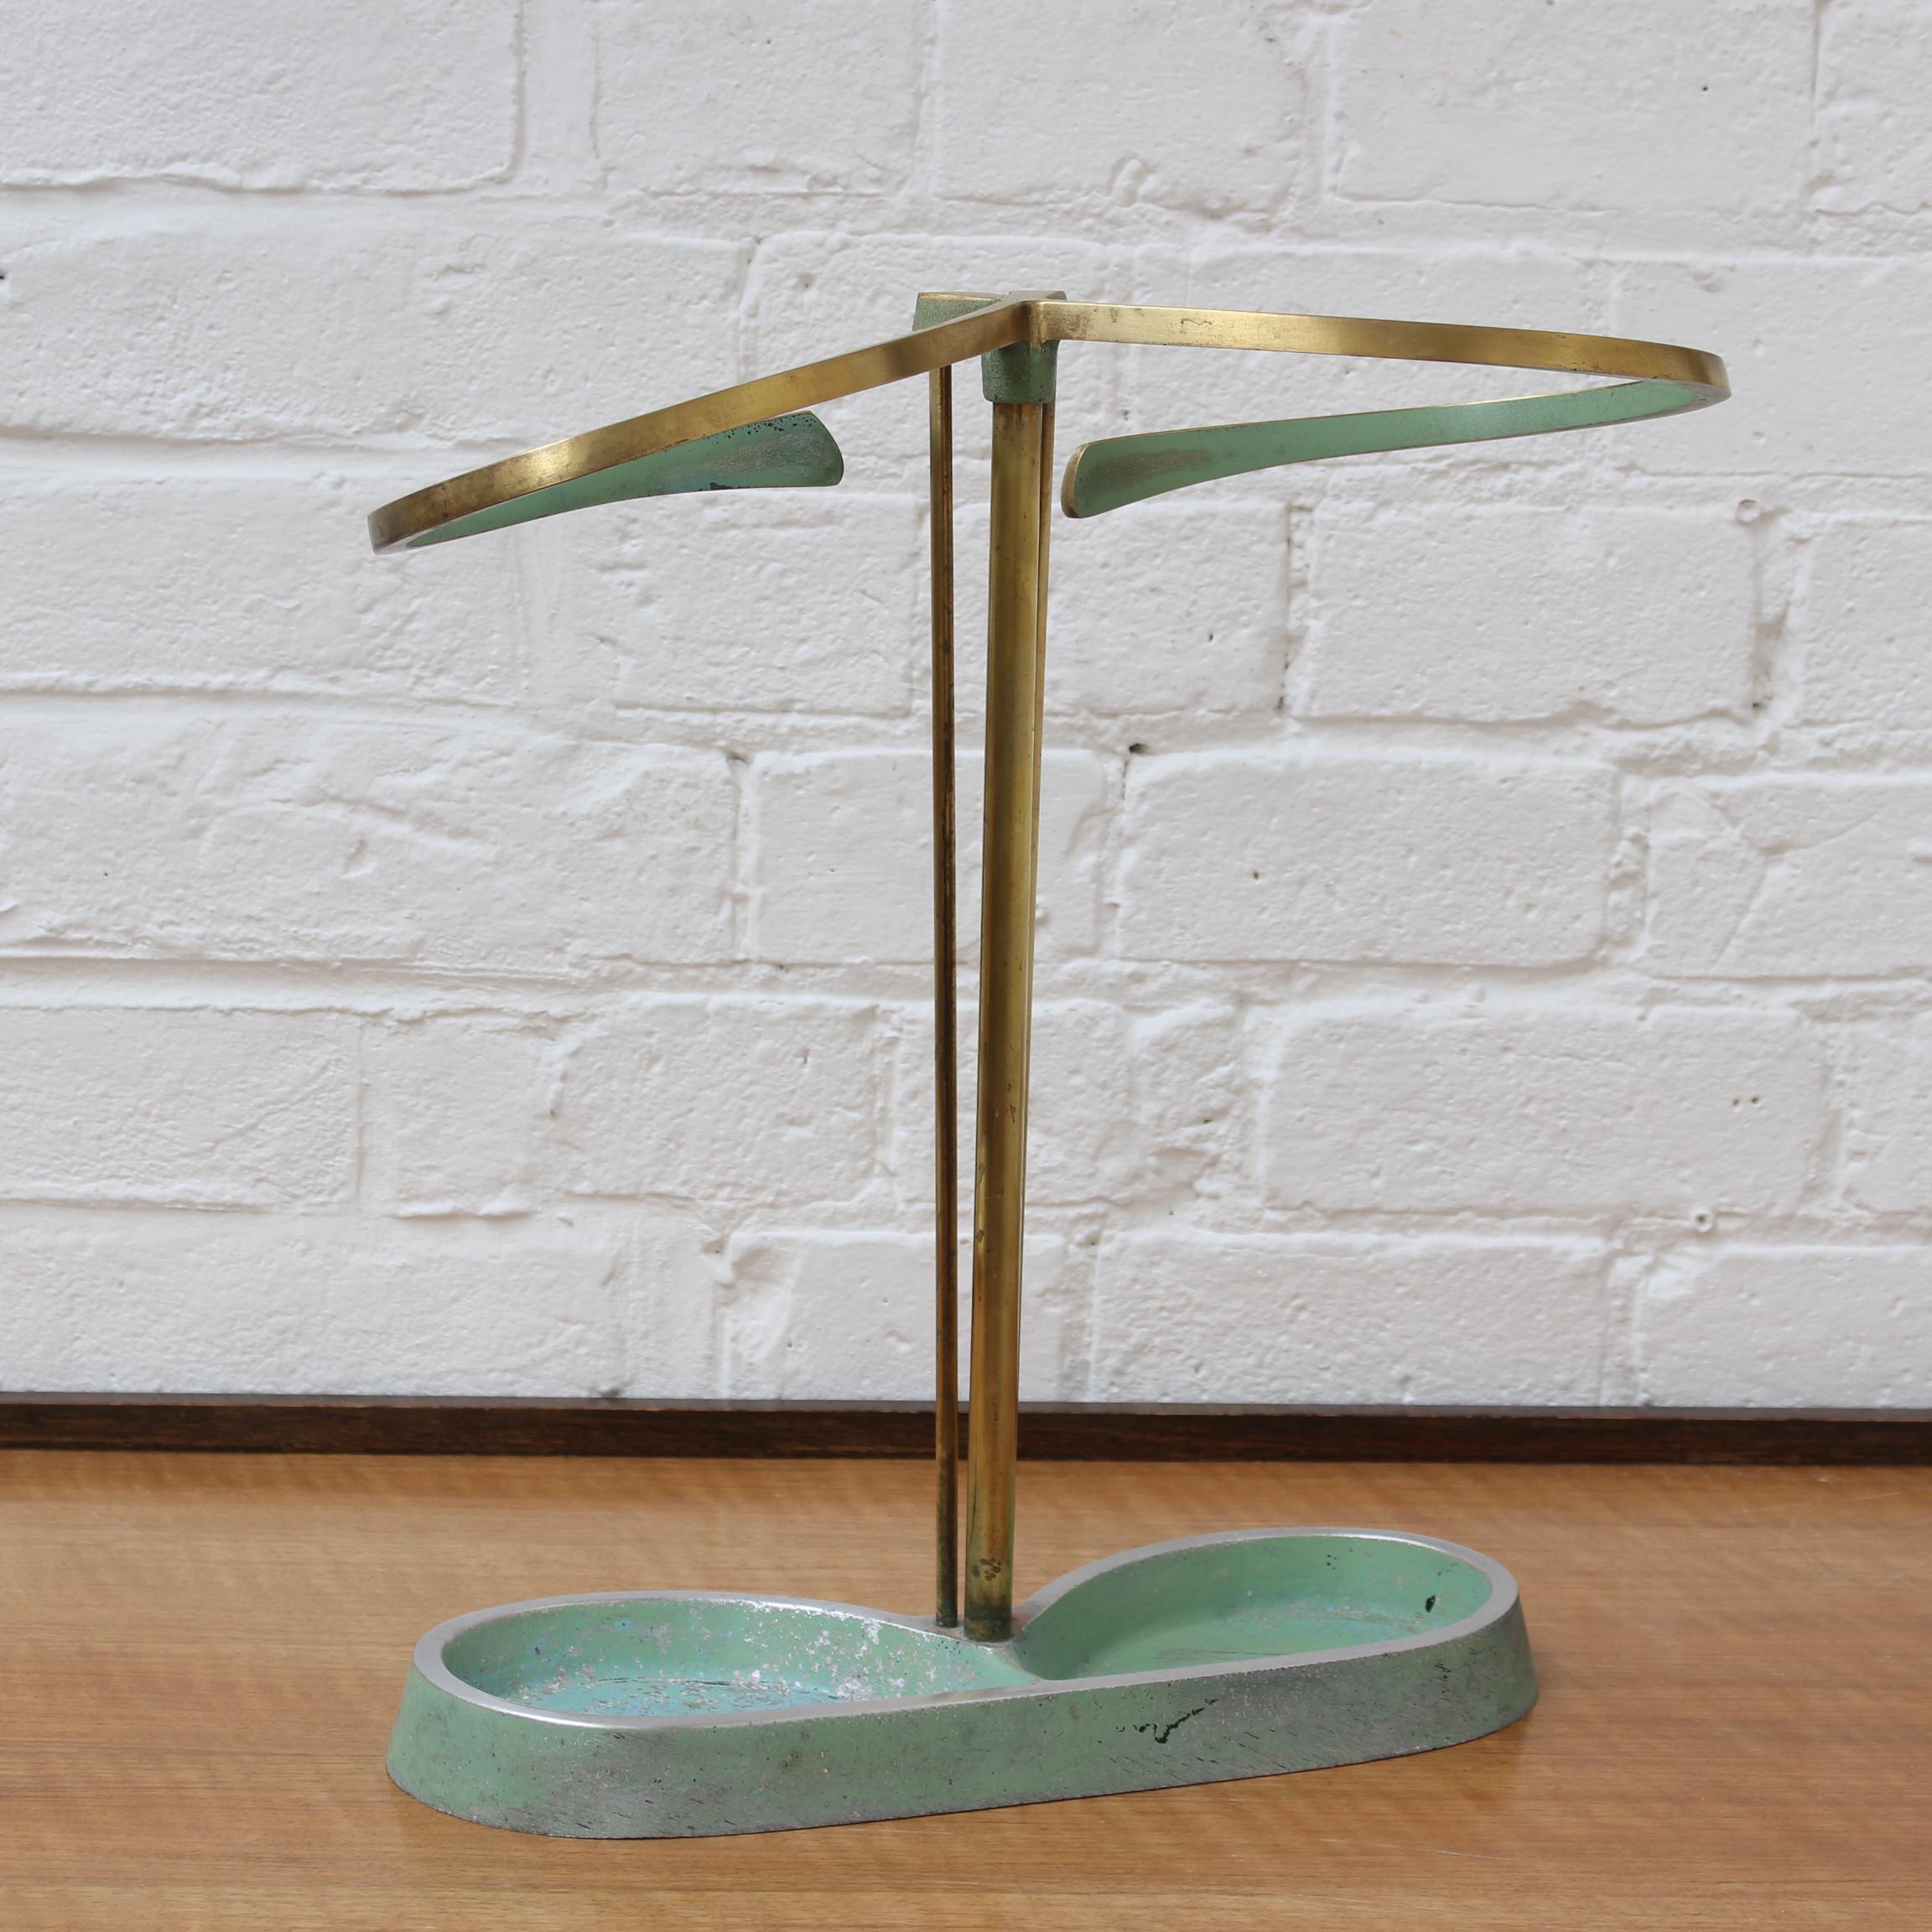 Midcentury Modern Brass Umbrella Stand Attributed to Artes H&H Seefried Steppach In Fair Condition For Sale In London, GB